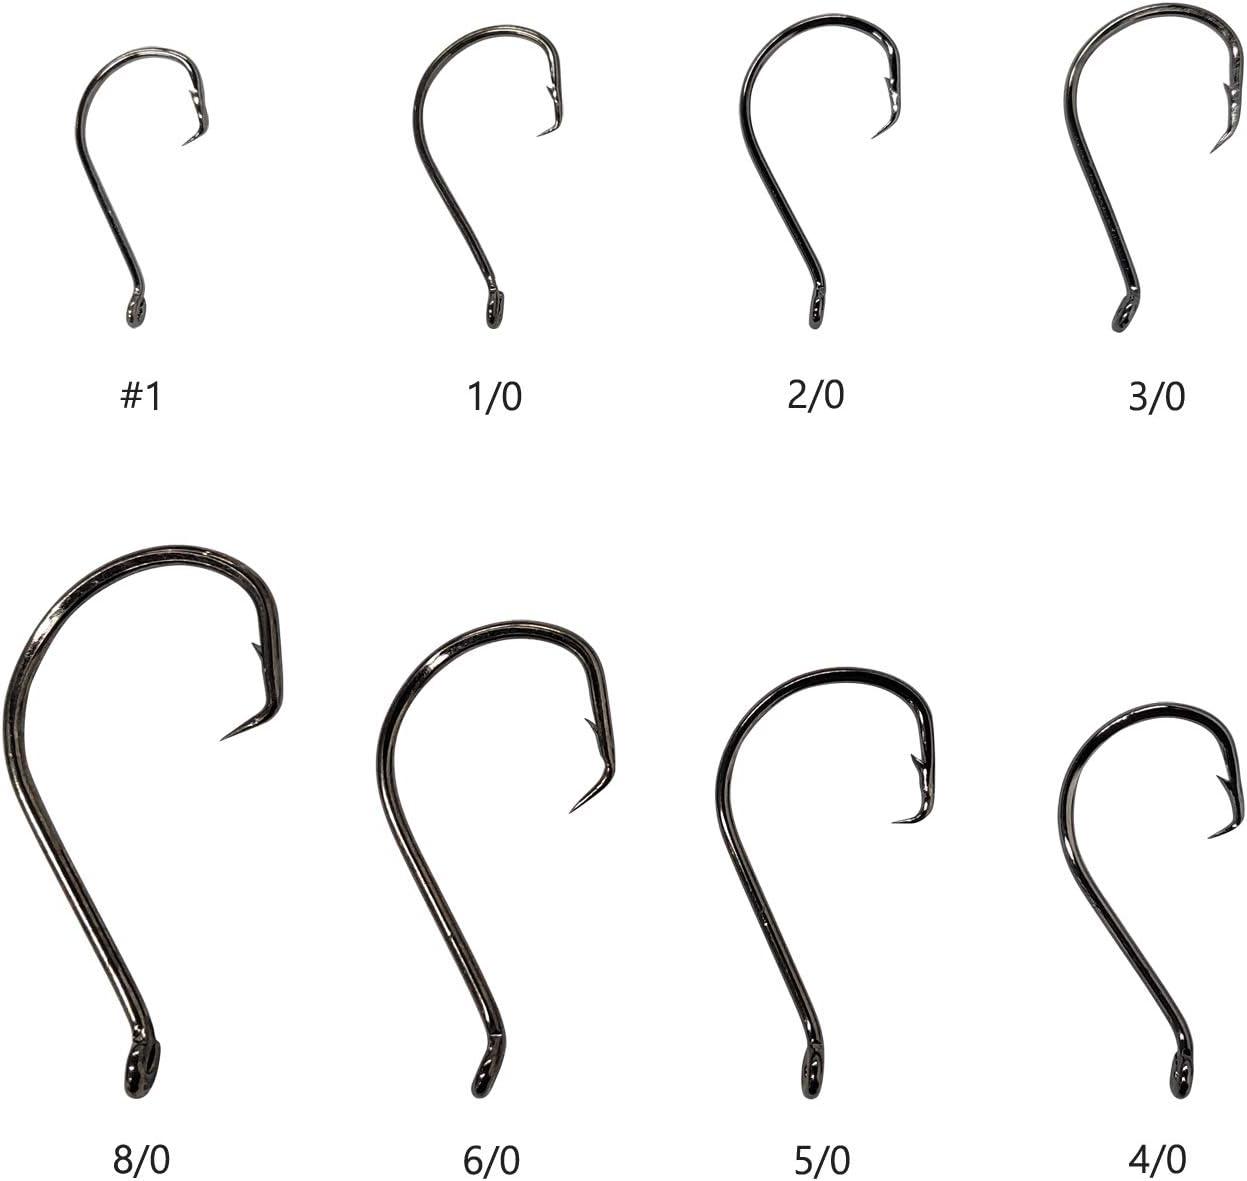  150PCS Circle Hooks, Strong High Carbon Steel Fresh and  Saltwater Fishing Hooks, Variety of Different Sizes Circle Hook - Size:#1  1/0 2/0 3/0 4/0 5/0 6/0 8/0 : Sports & Outdoors